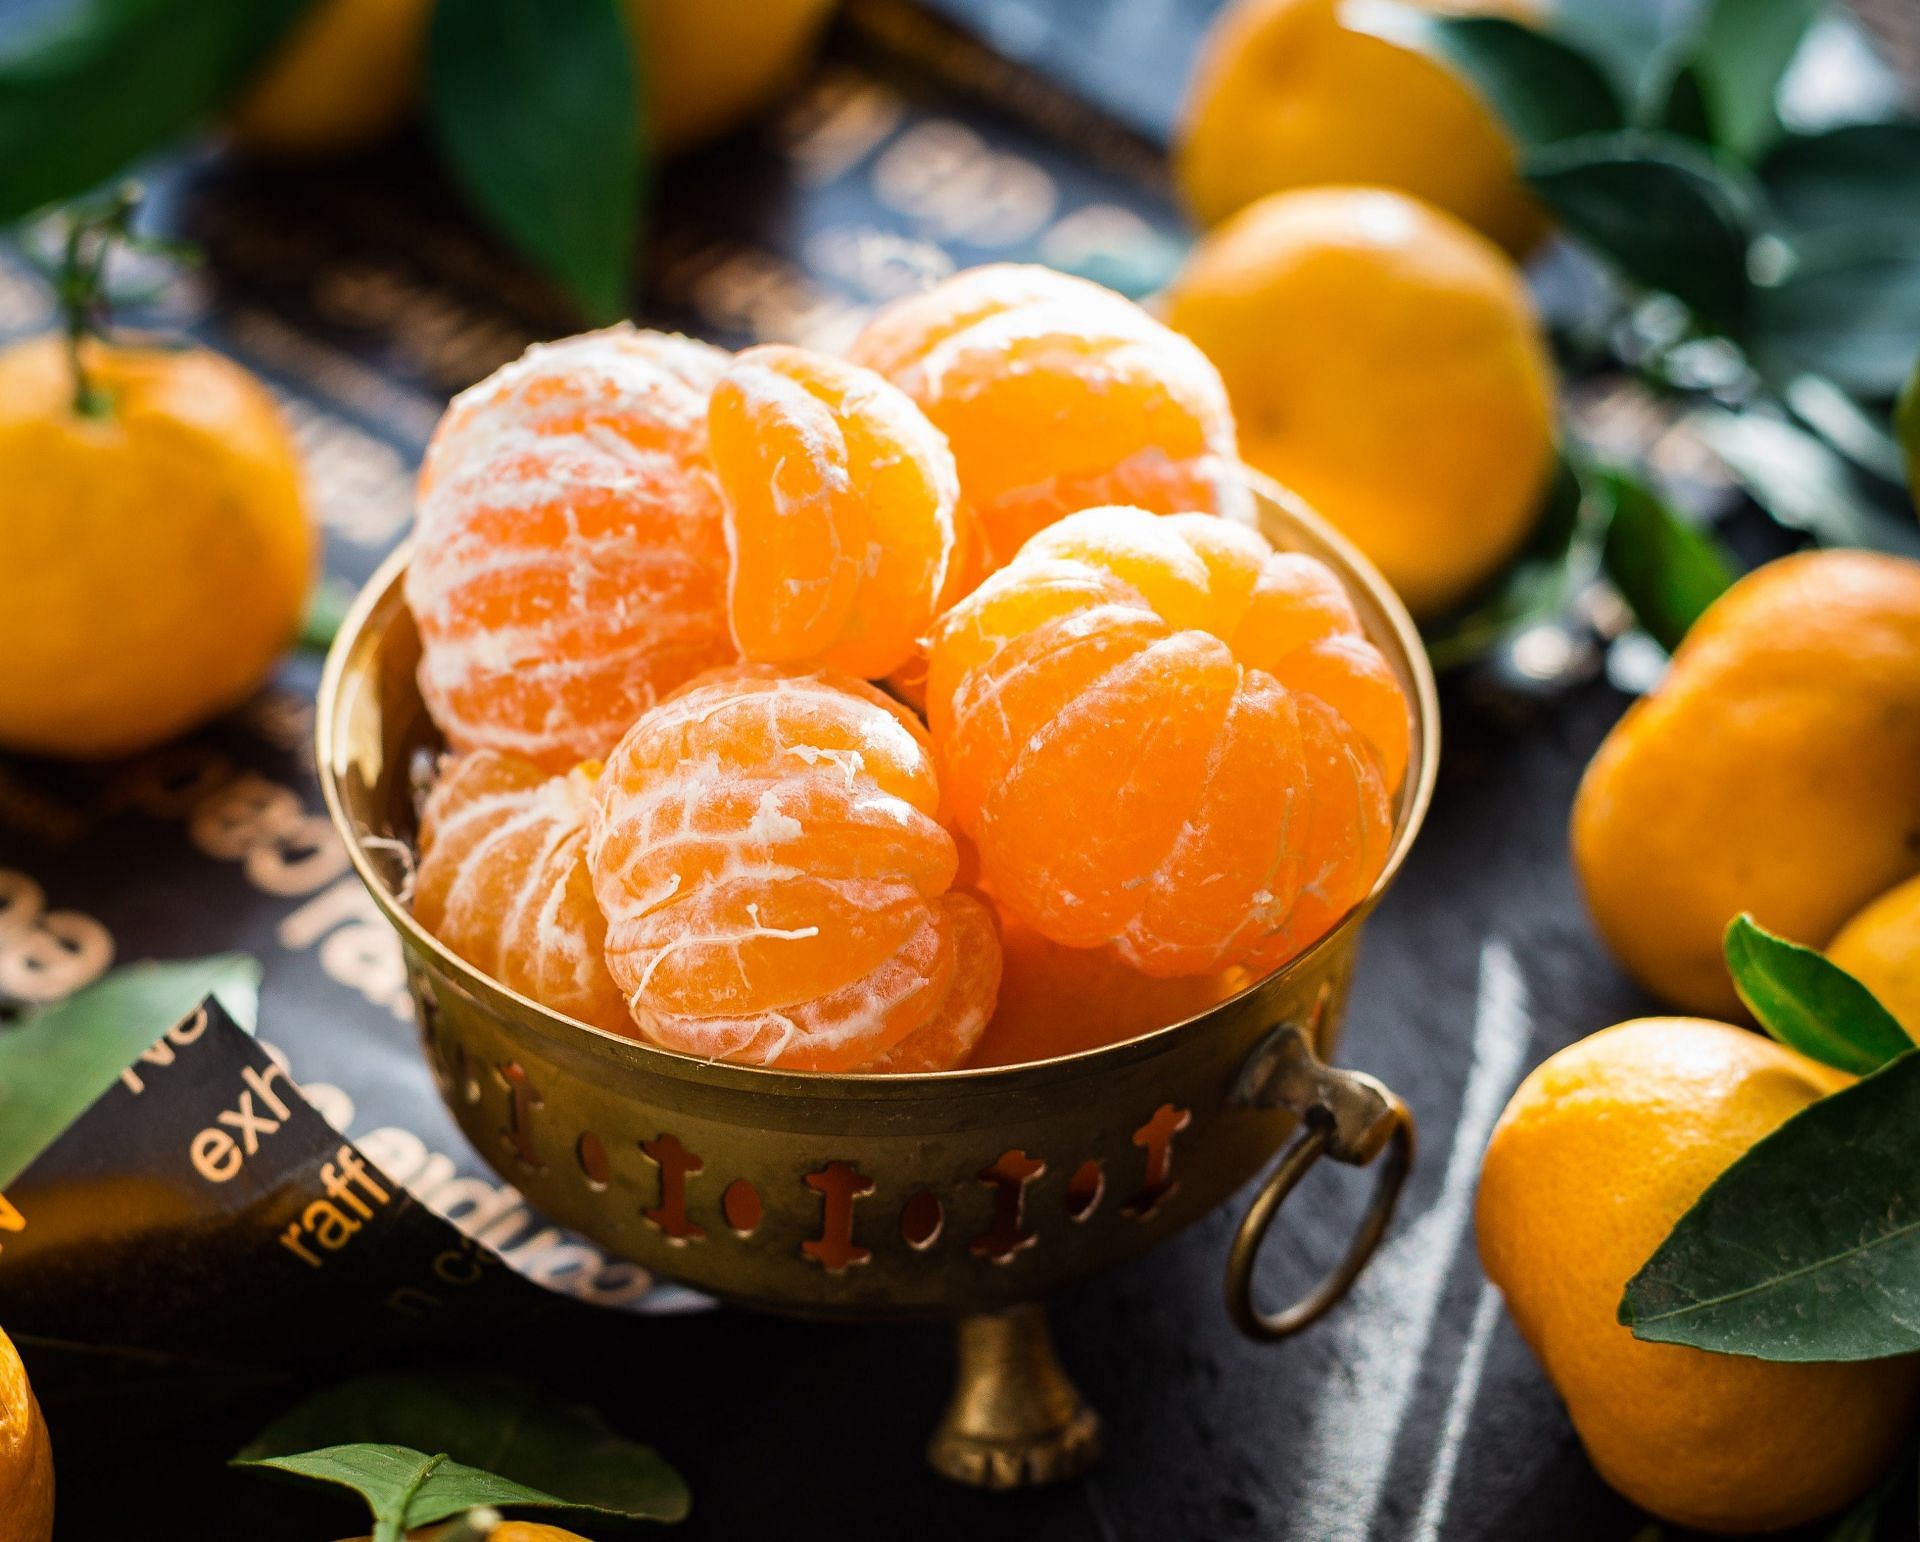 Benefits of orange for dehydration(image sourced via Pexels / Photo by pixabay)